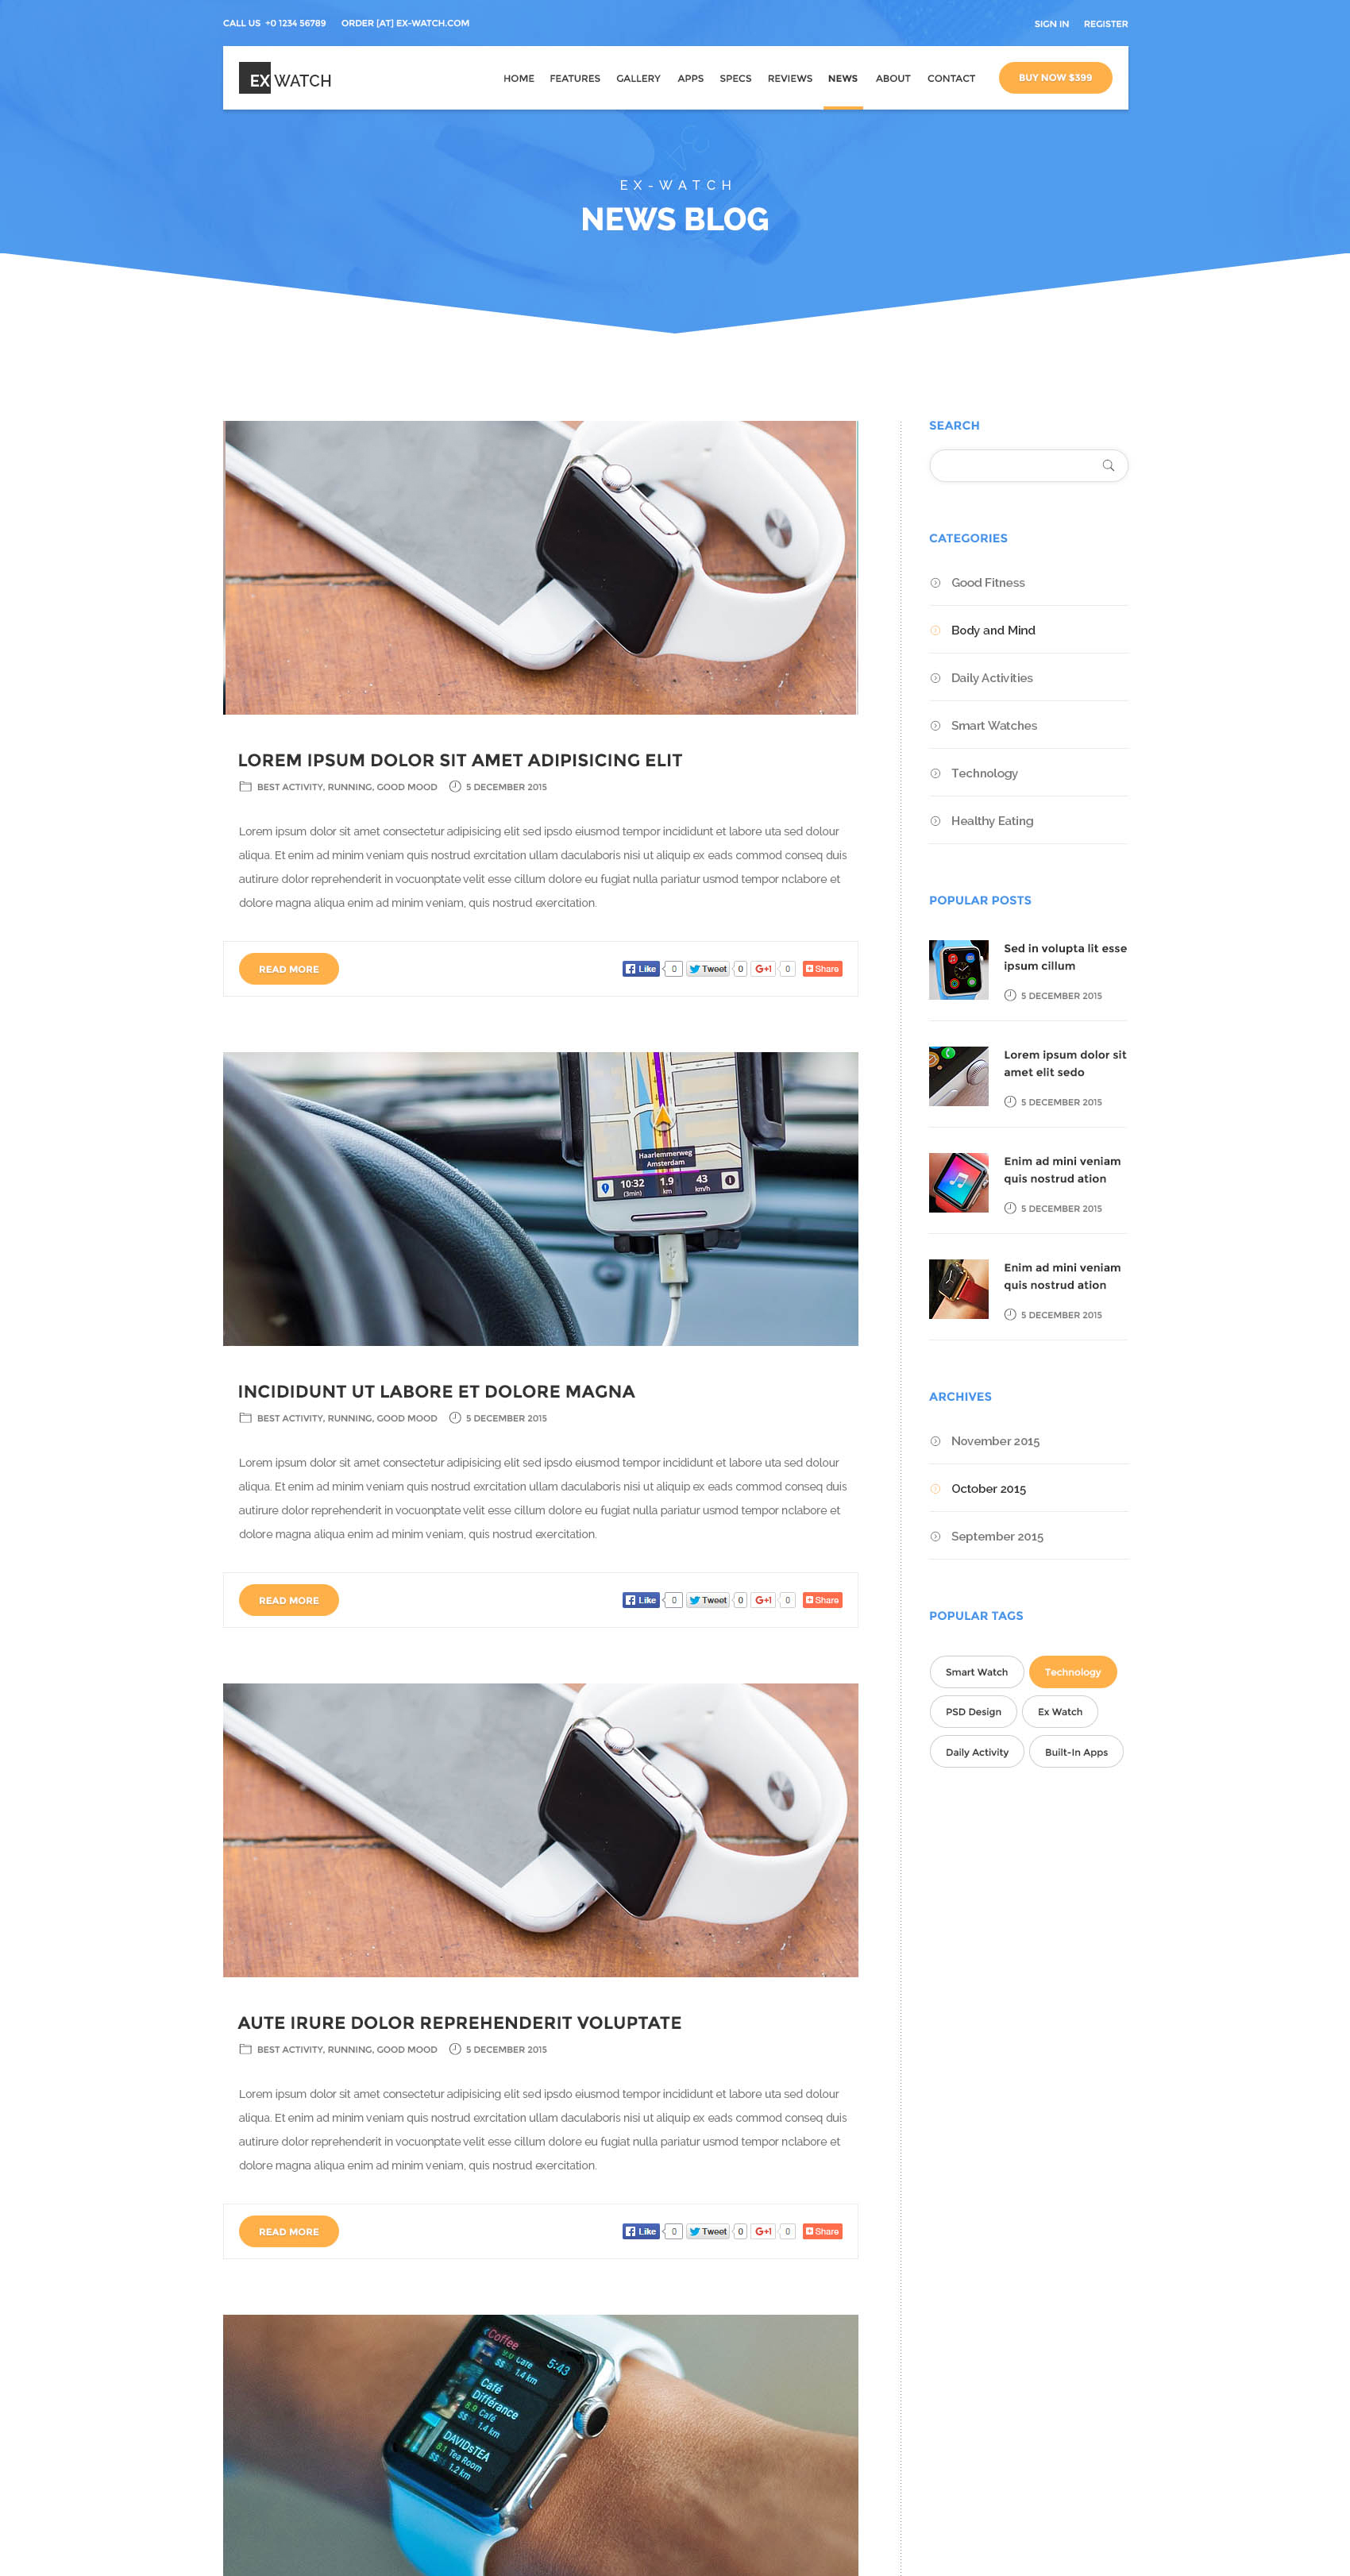 One product theme